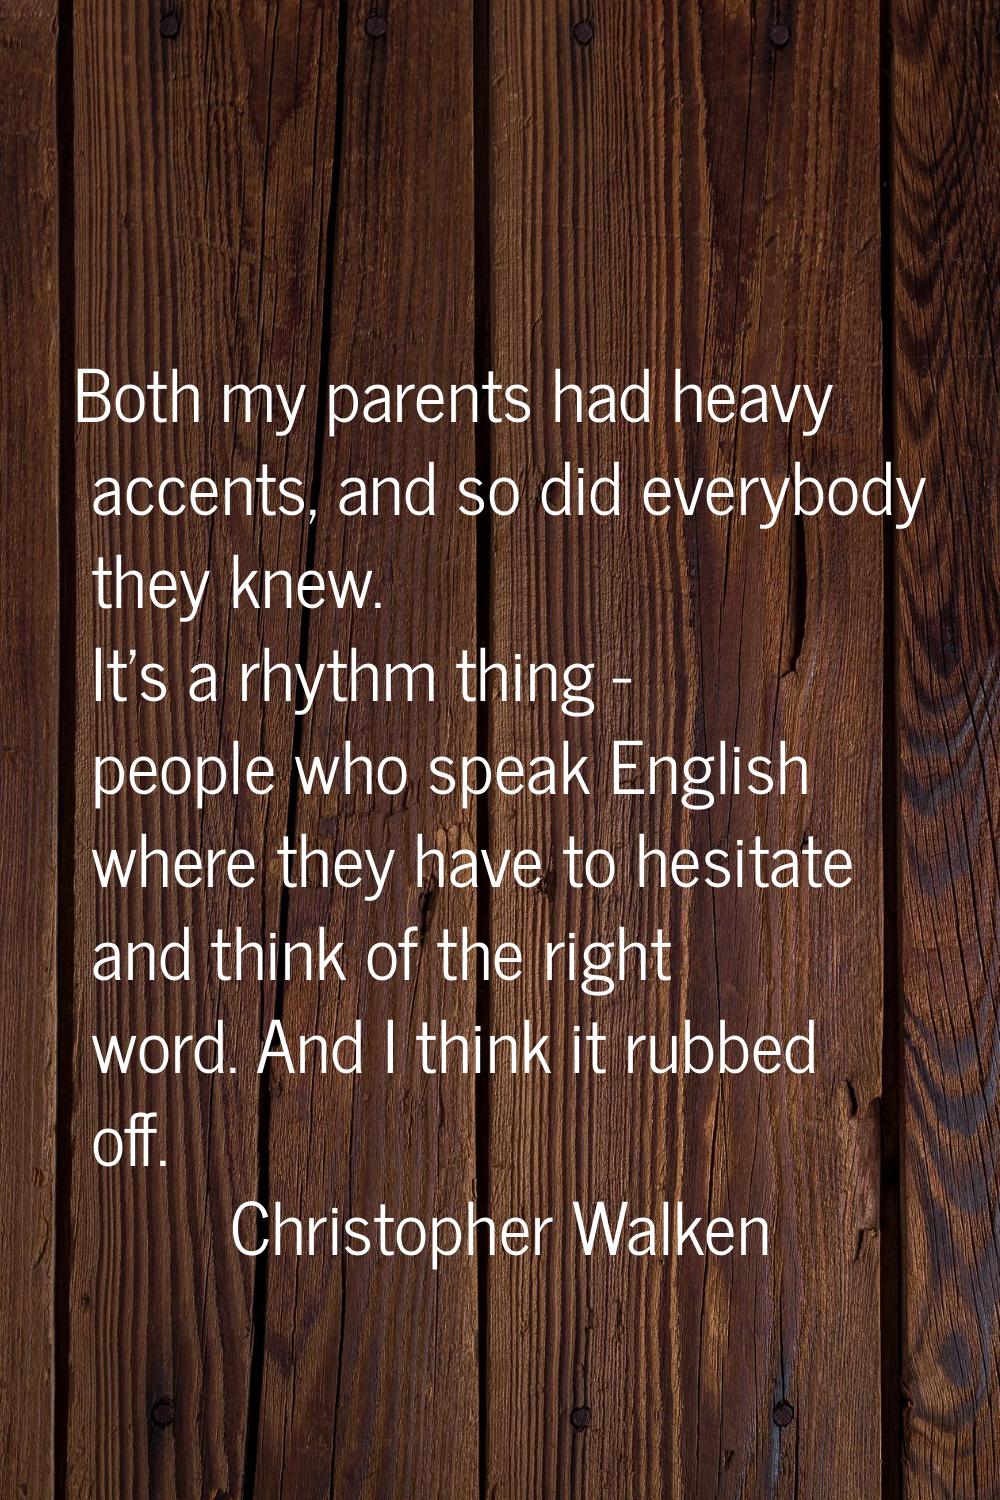 Both my parents had heavy accents, and so did everybody they knew. It's a rhythm thing - people who